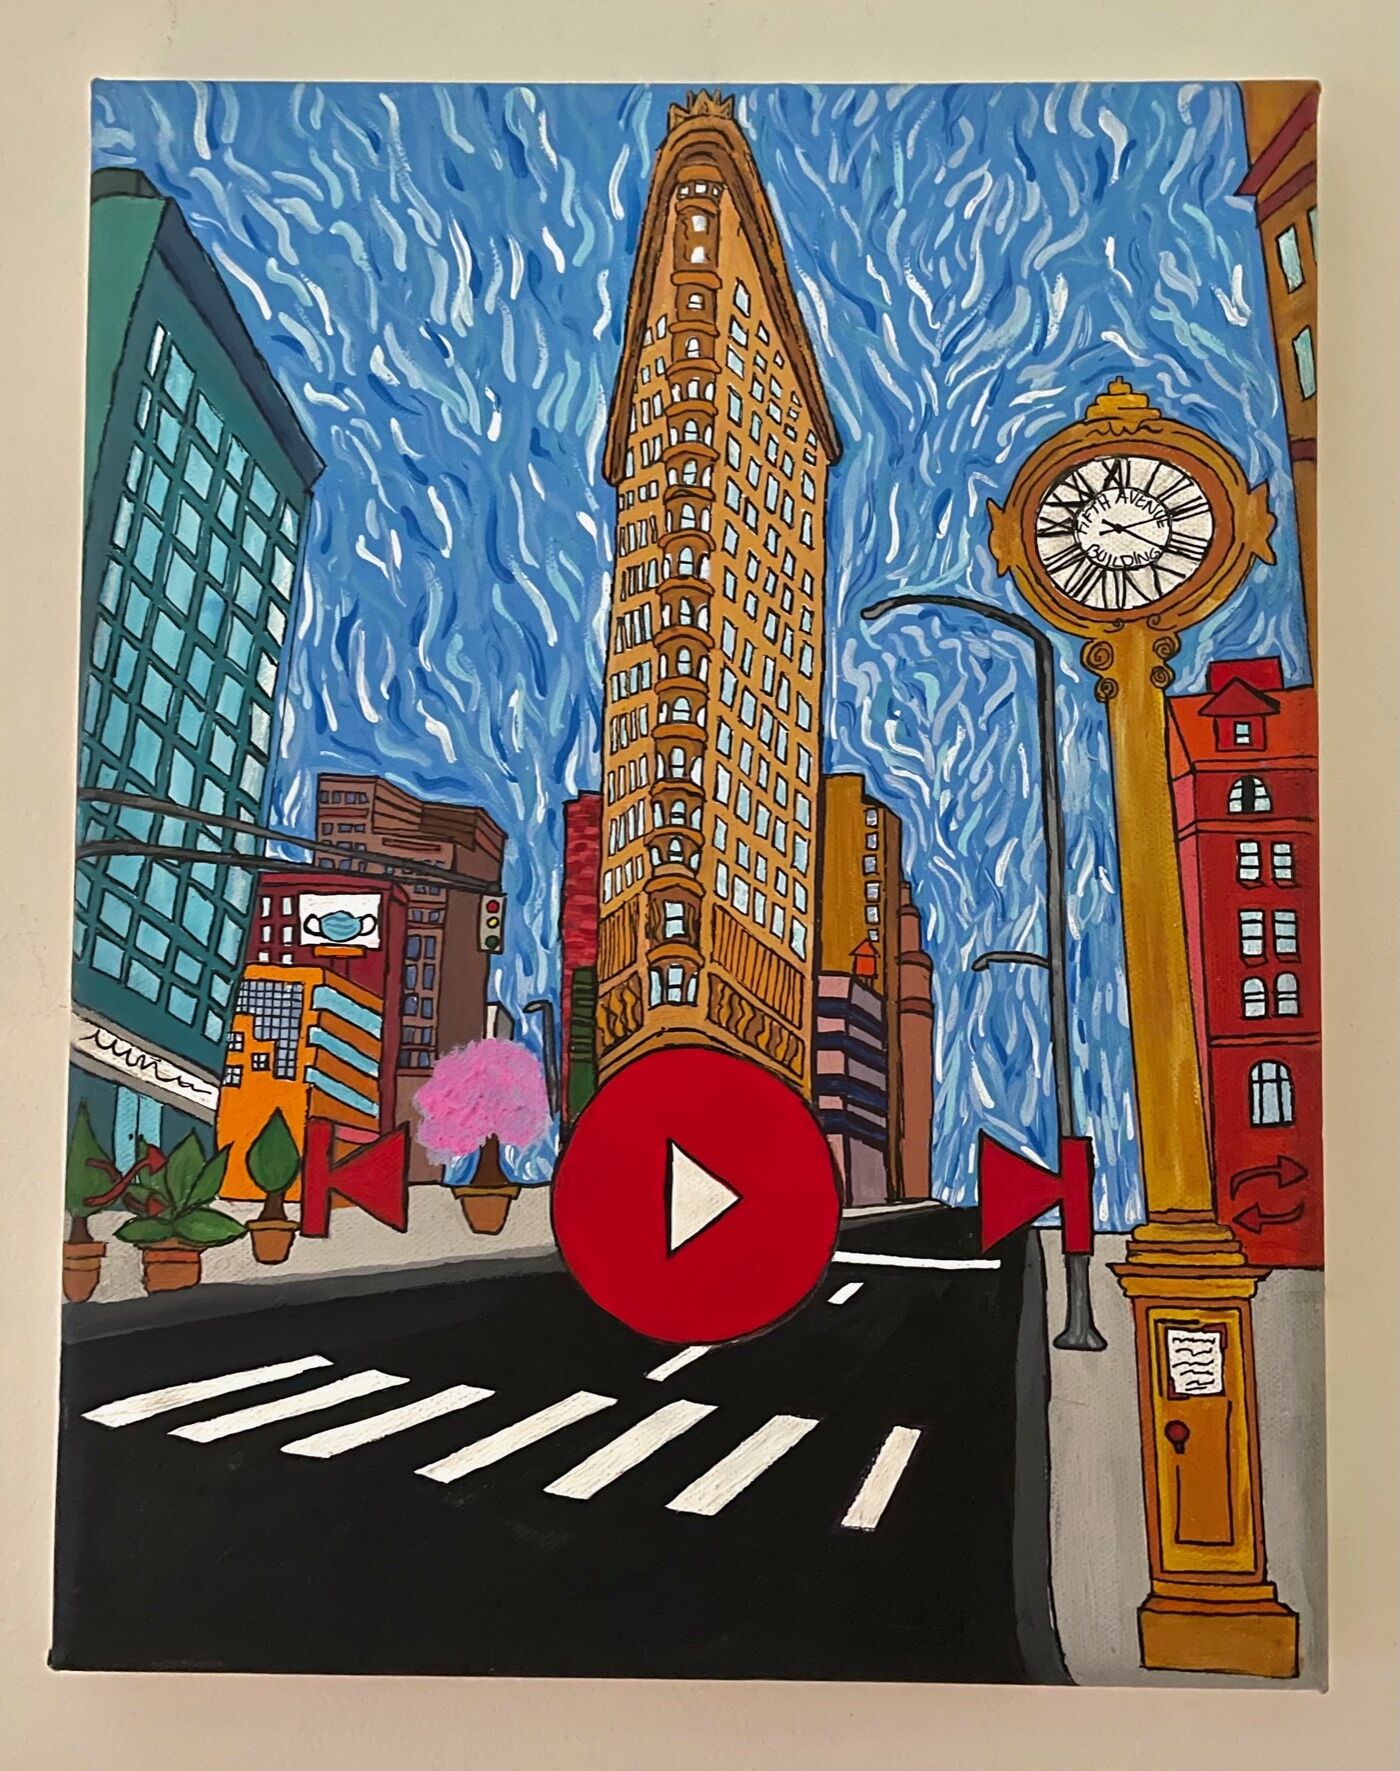 A drawing of the Flatiron Building with a red, circular play button drawn in the foreground.